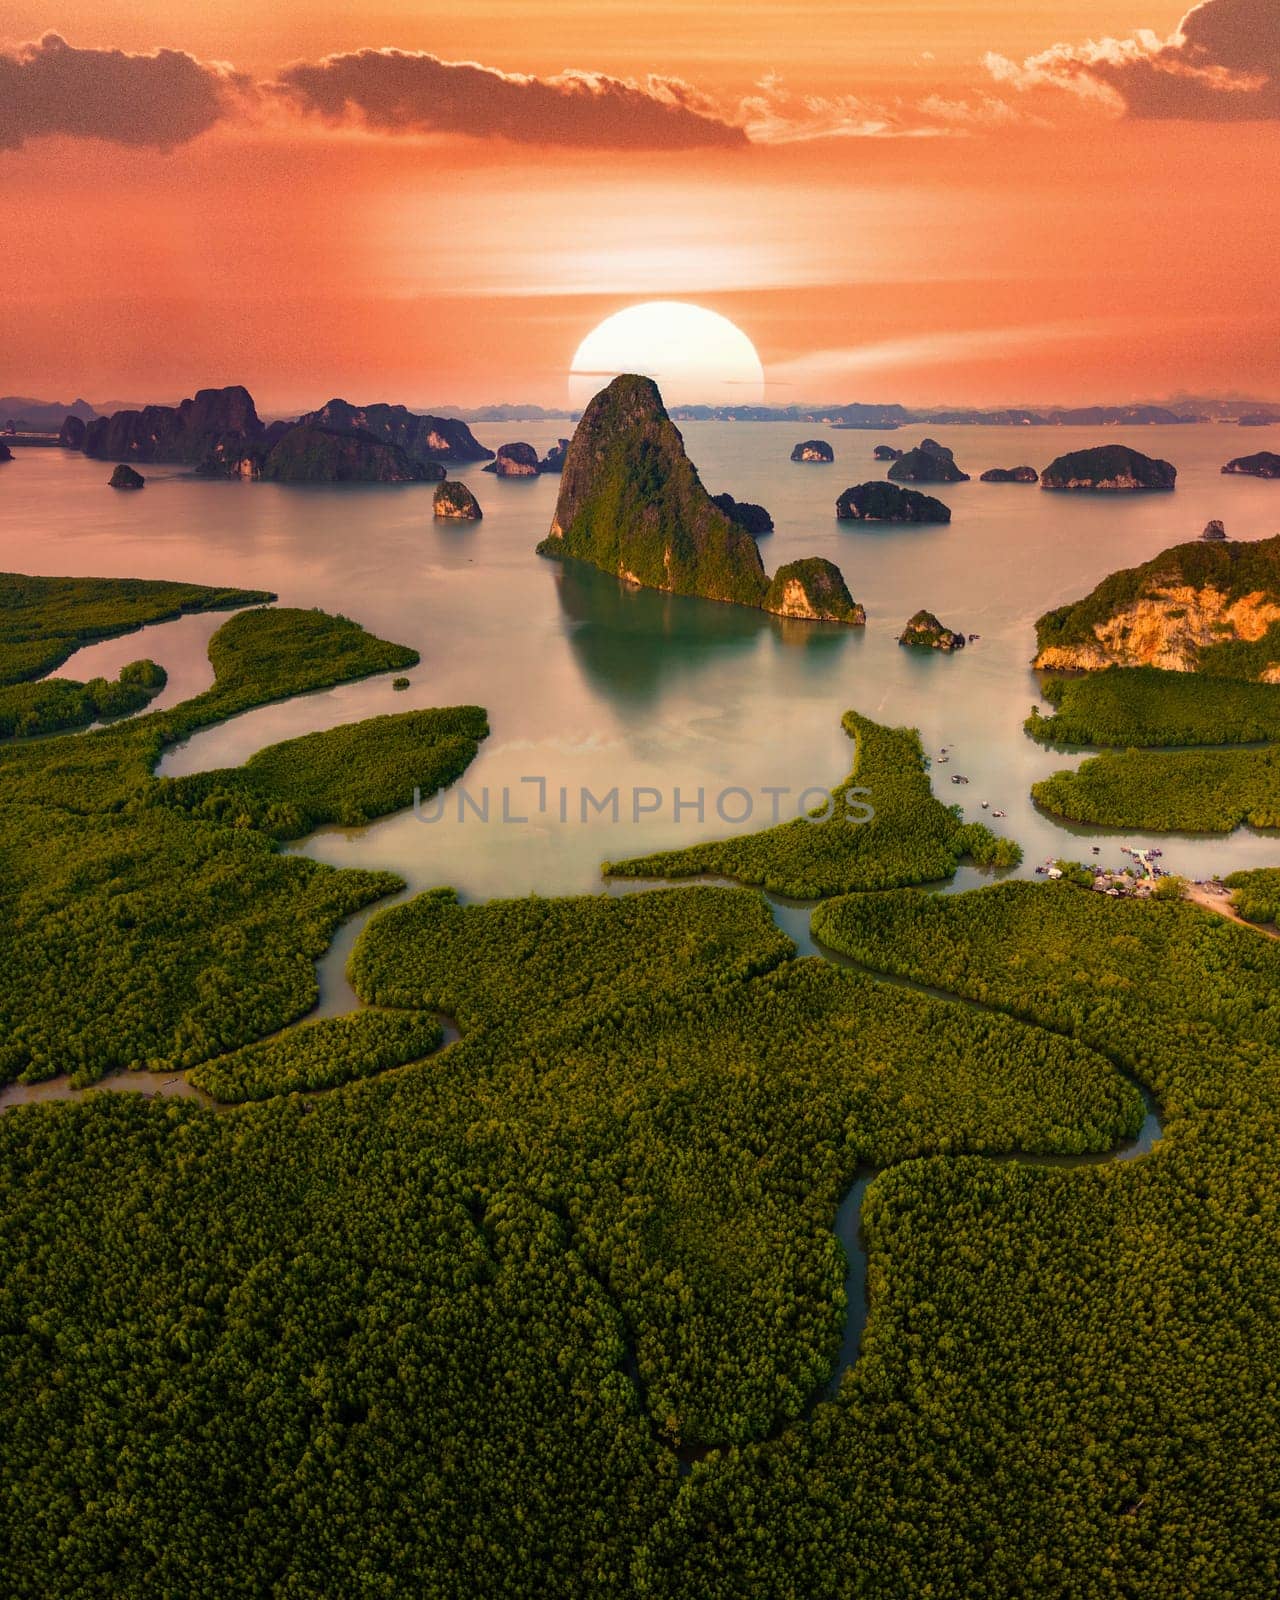 Sametnangshe, view of mountains in Phangnga bay with mangrove forest in andaman sea Thailand by fokkebok